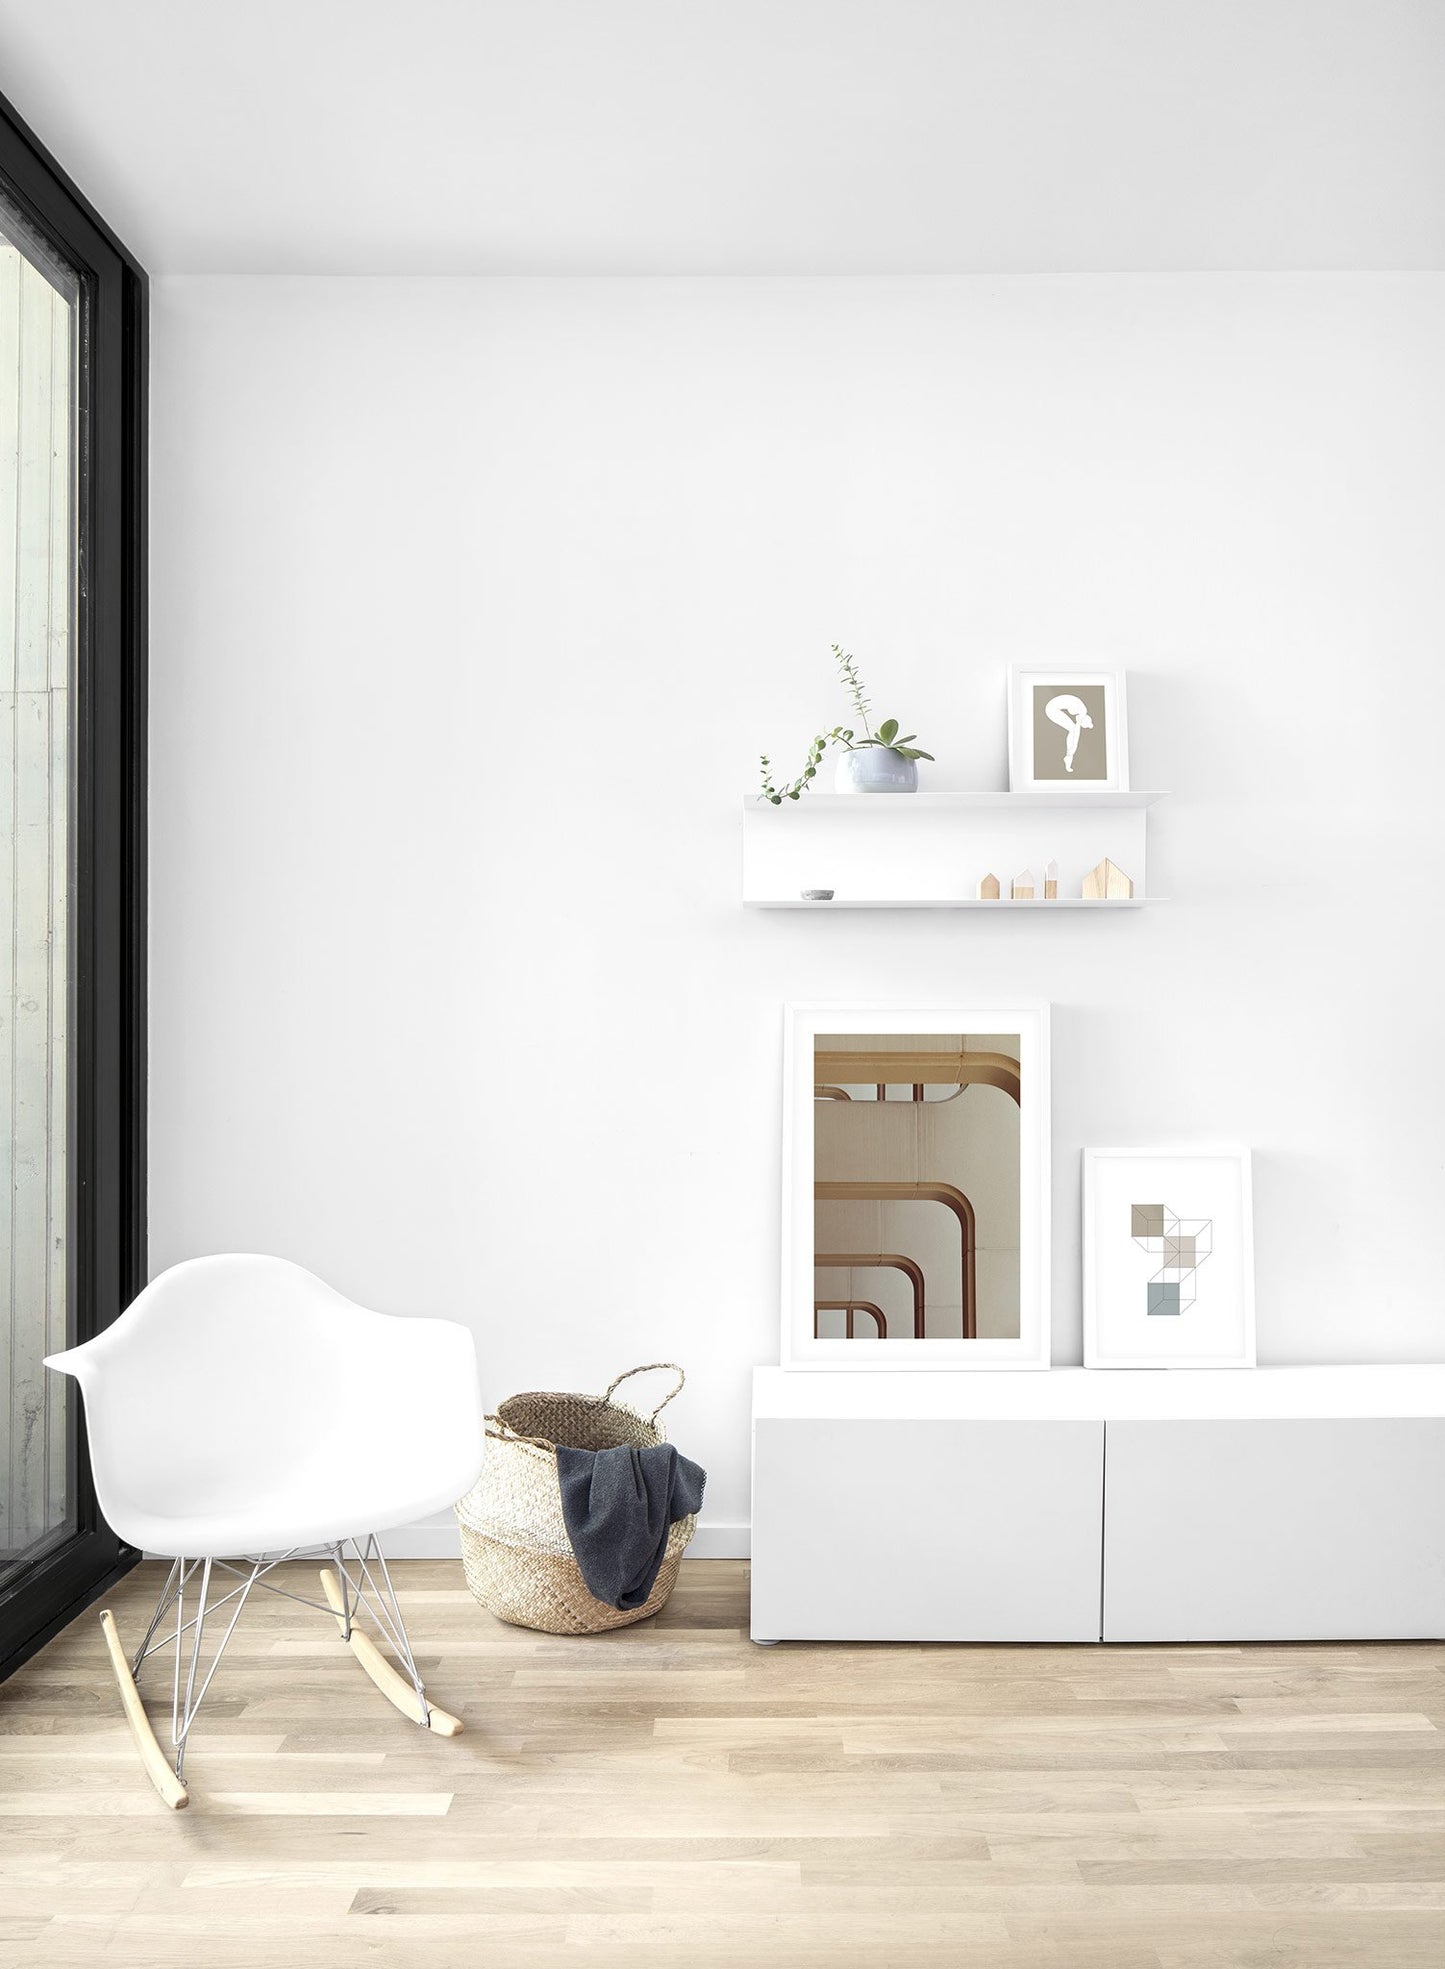 Modern minimalist poster by Opposite Wall with photography of building arches - Lifestyle - Bedroom